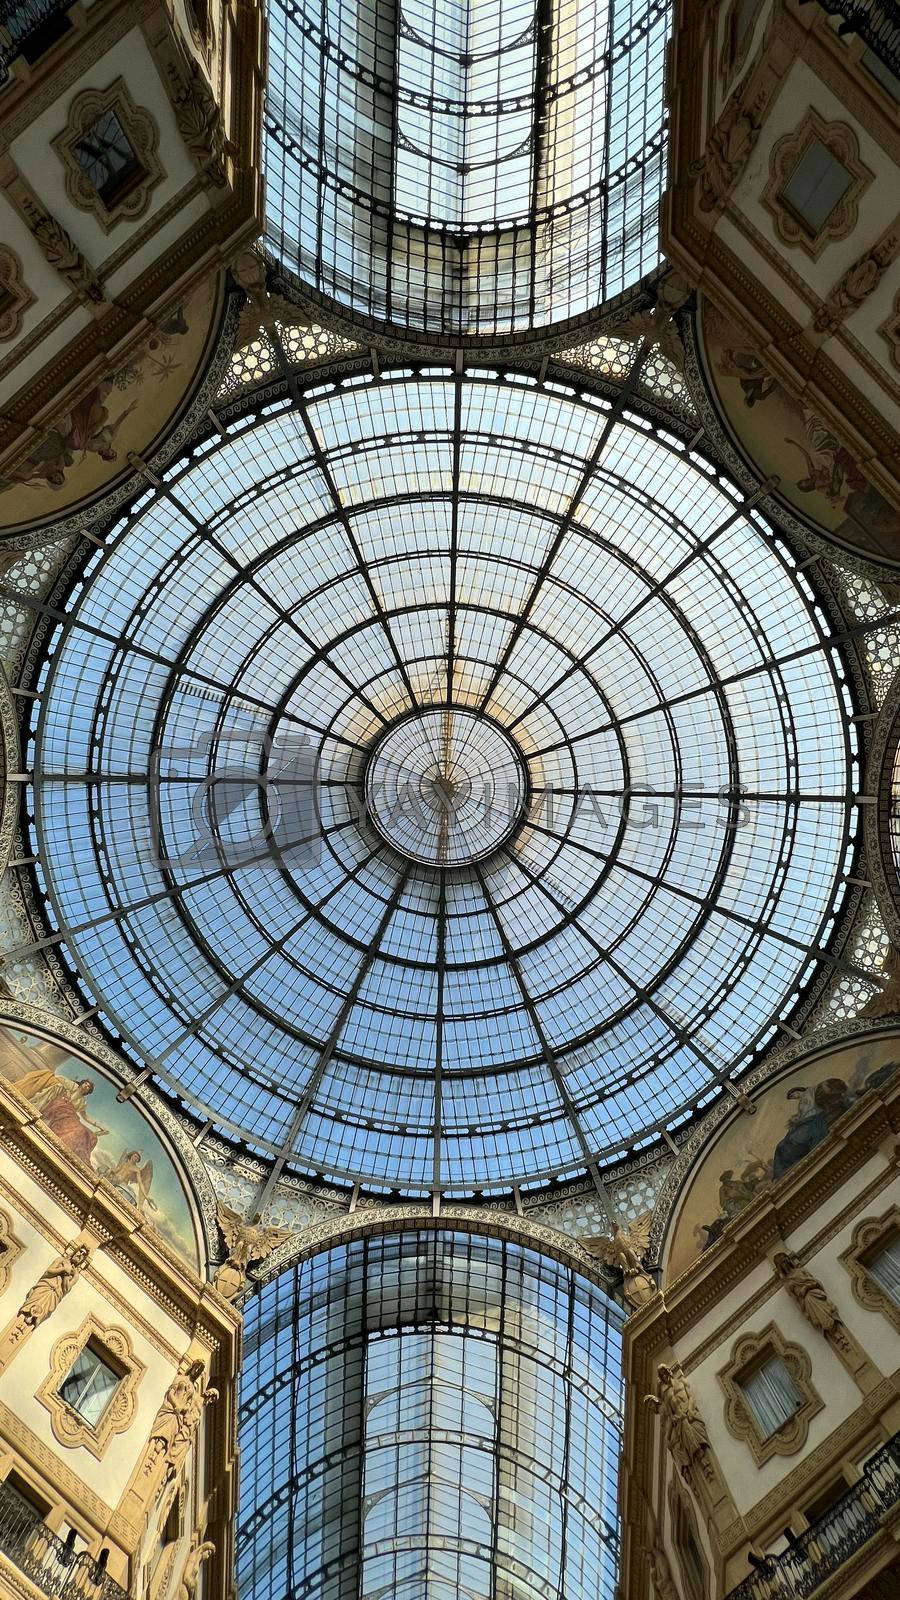 Royalty free image of Milan glass and metal roof of the Vittorio Emanuele II gallery by tinofotografie